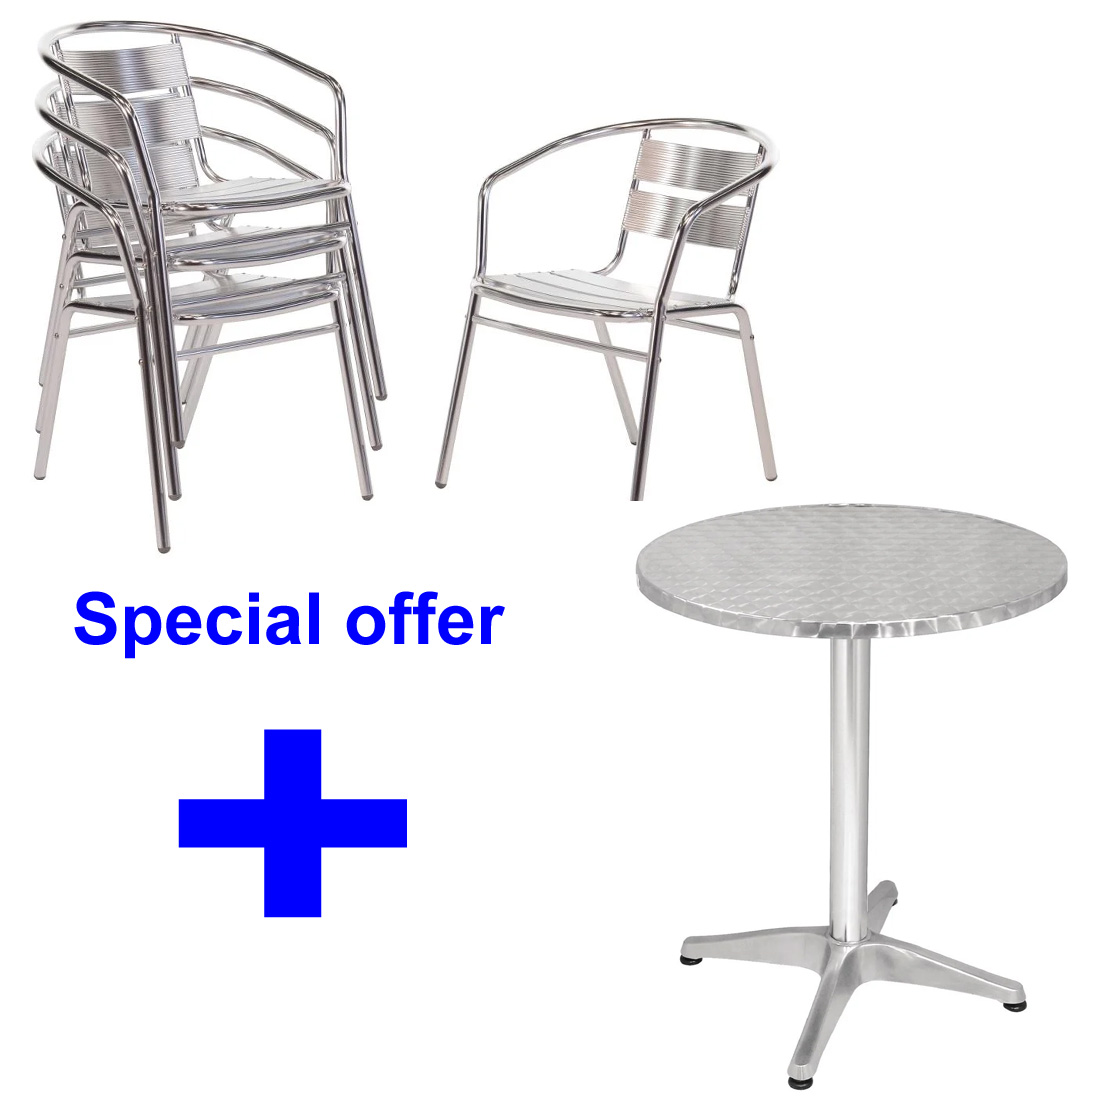 Table & 4 x Chairs - Cafe/Bistro style aluminium and stainless (